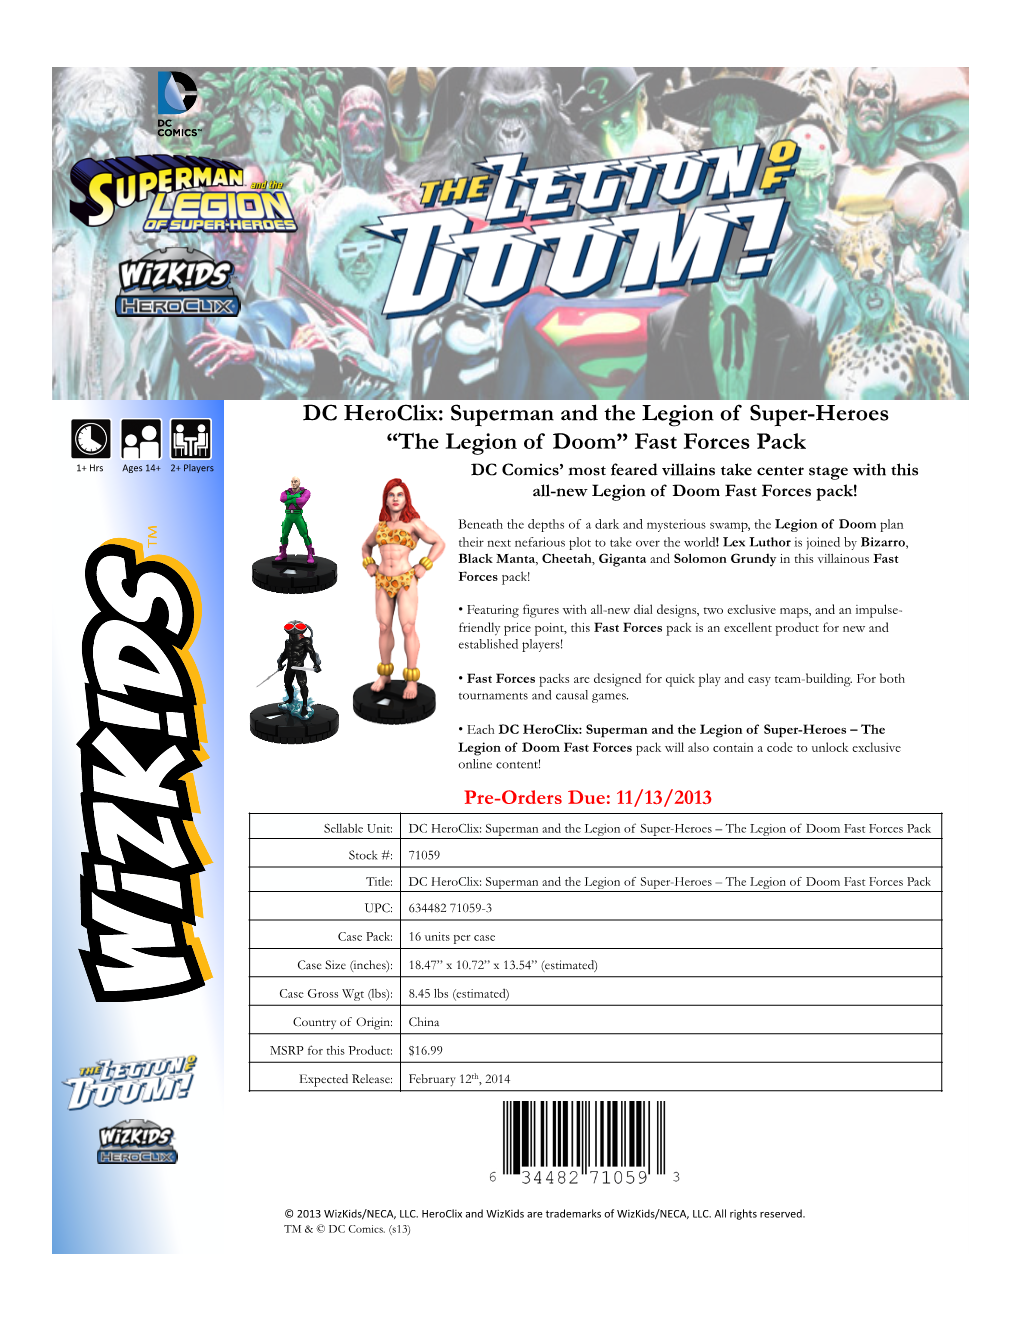 DC Heroclix: Superman and the Legion of Super-Heroes “The